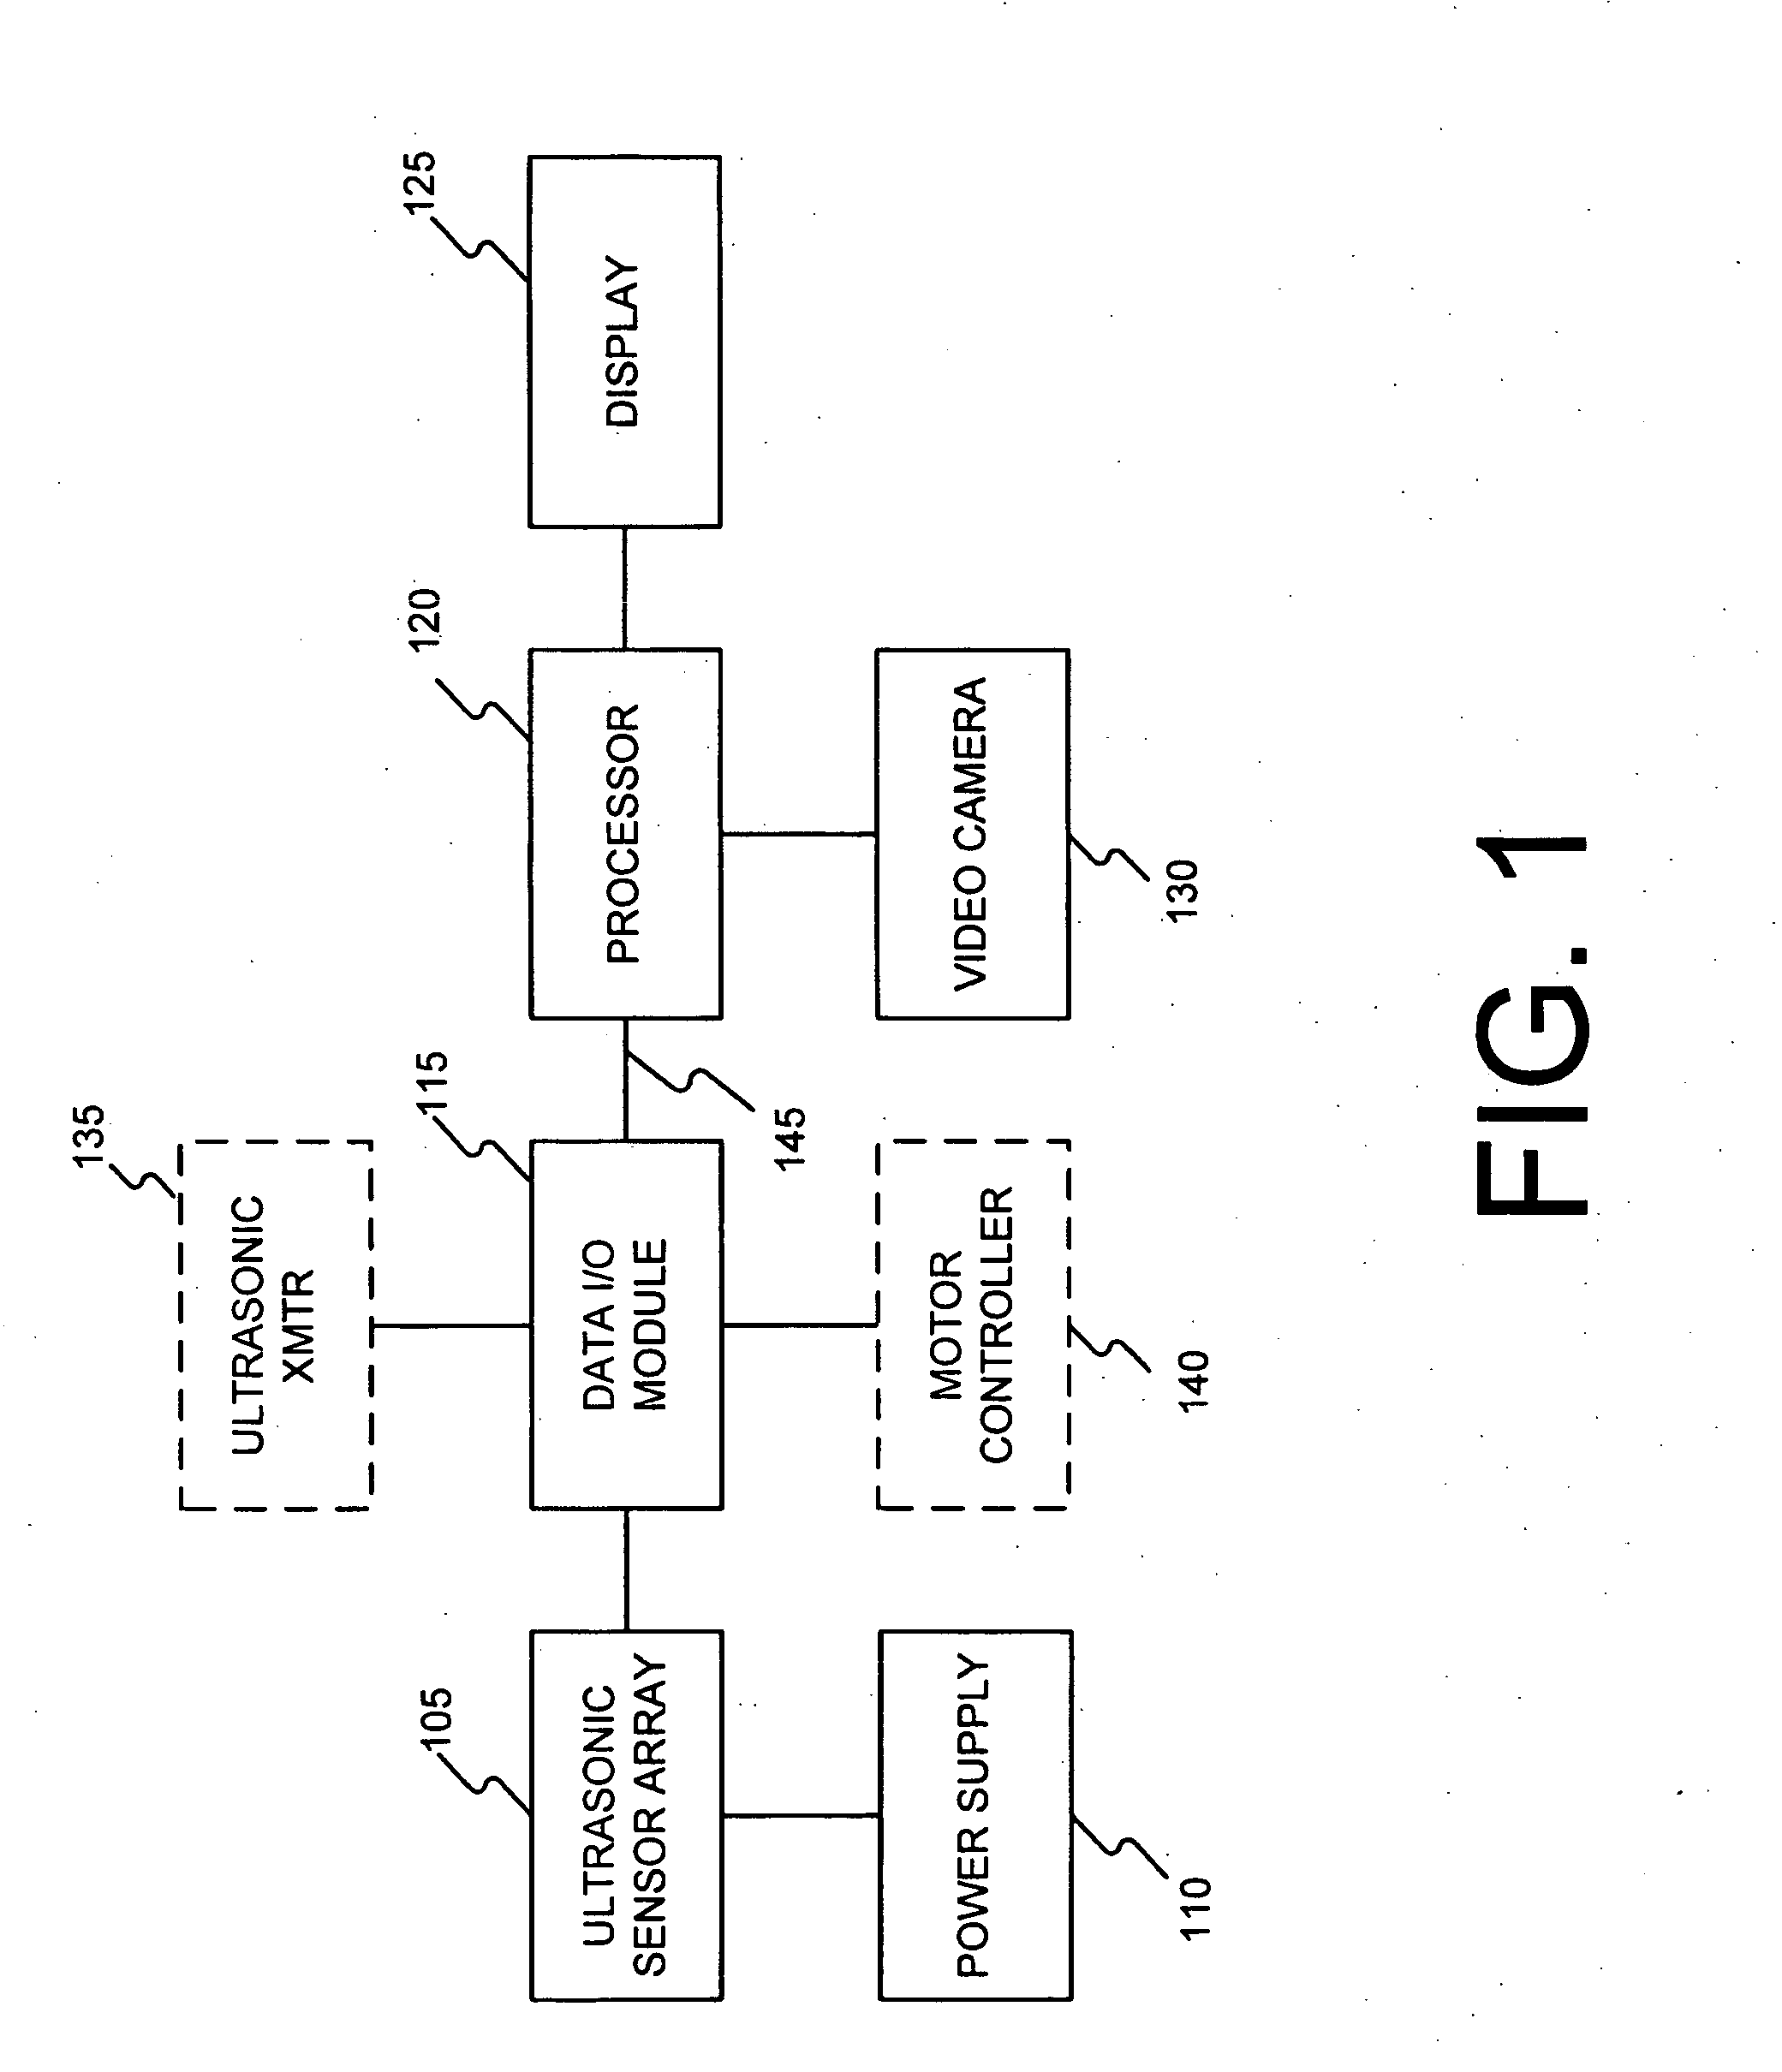 System and method for ultrasonic detection and imaging